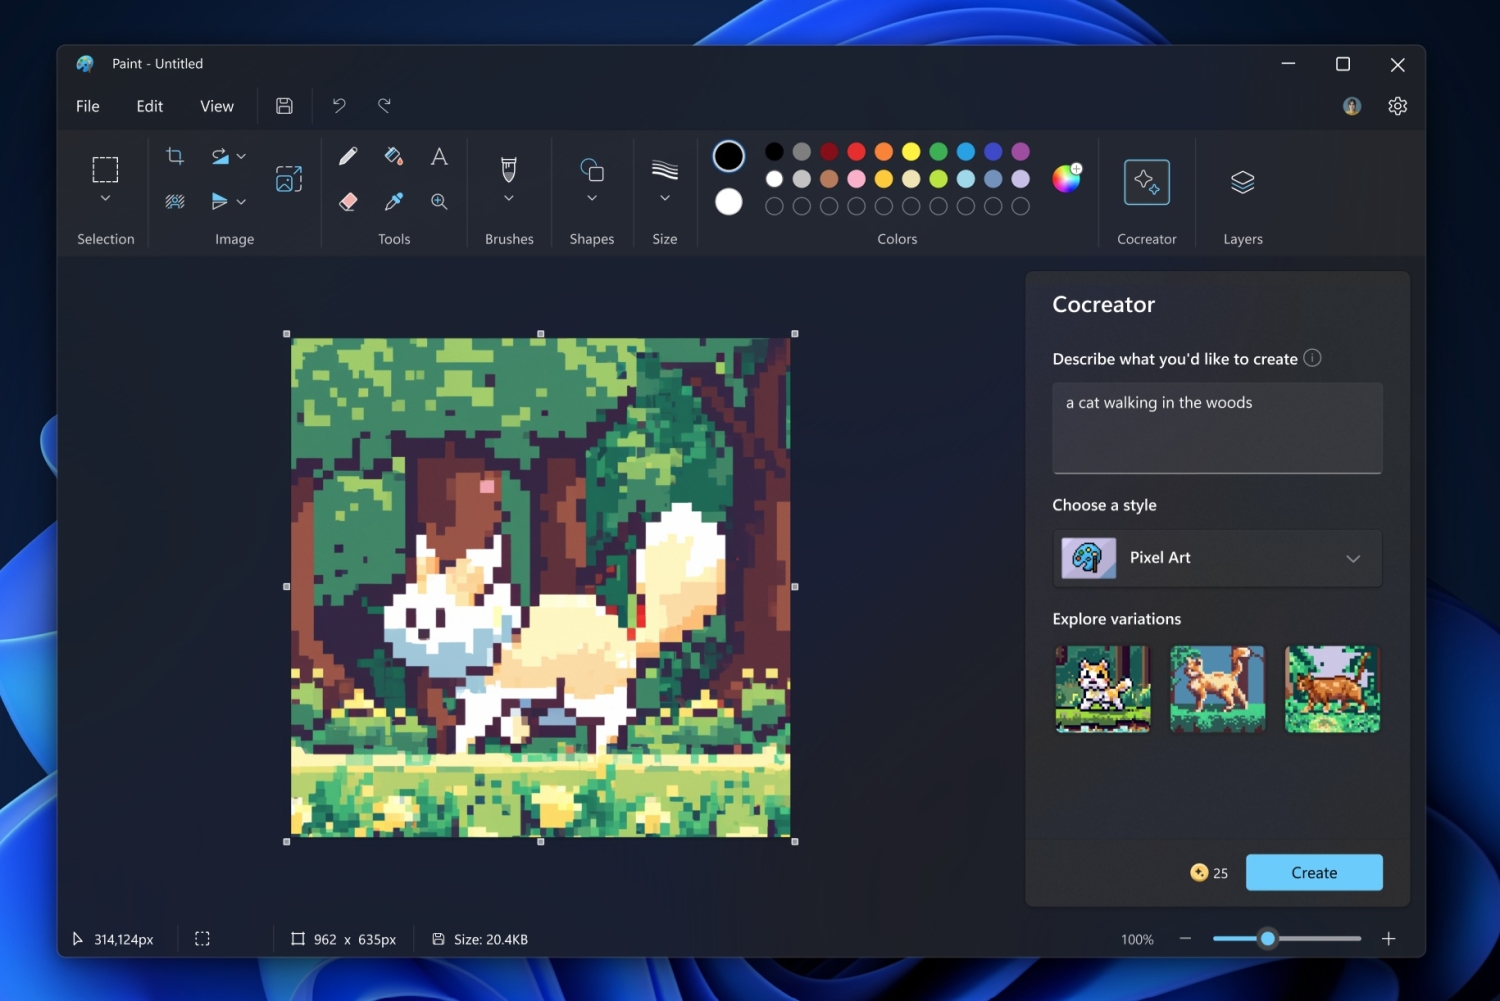 Microsoft Paint is now an AI image generator thanks to the new Cocreator feature and DALL-E